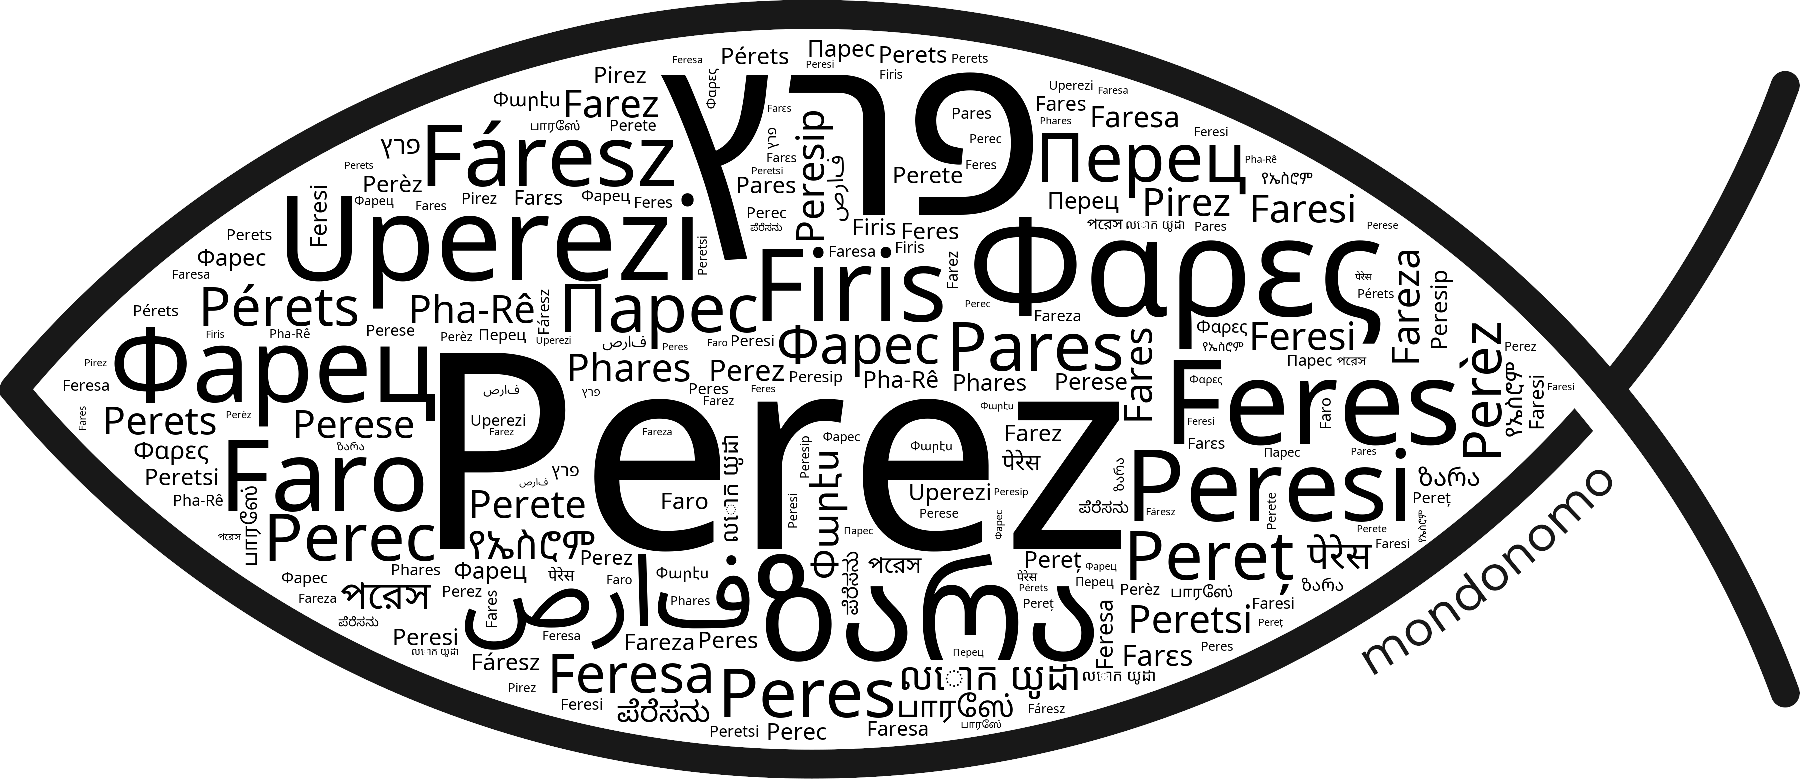 Name Perez in the world's Bibles